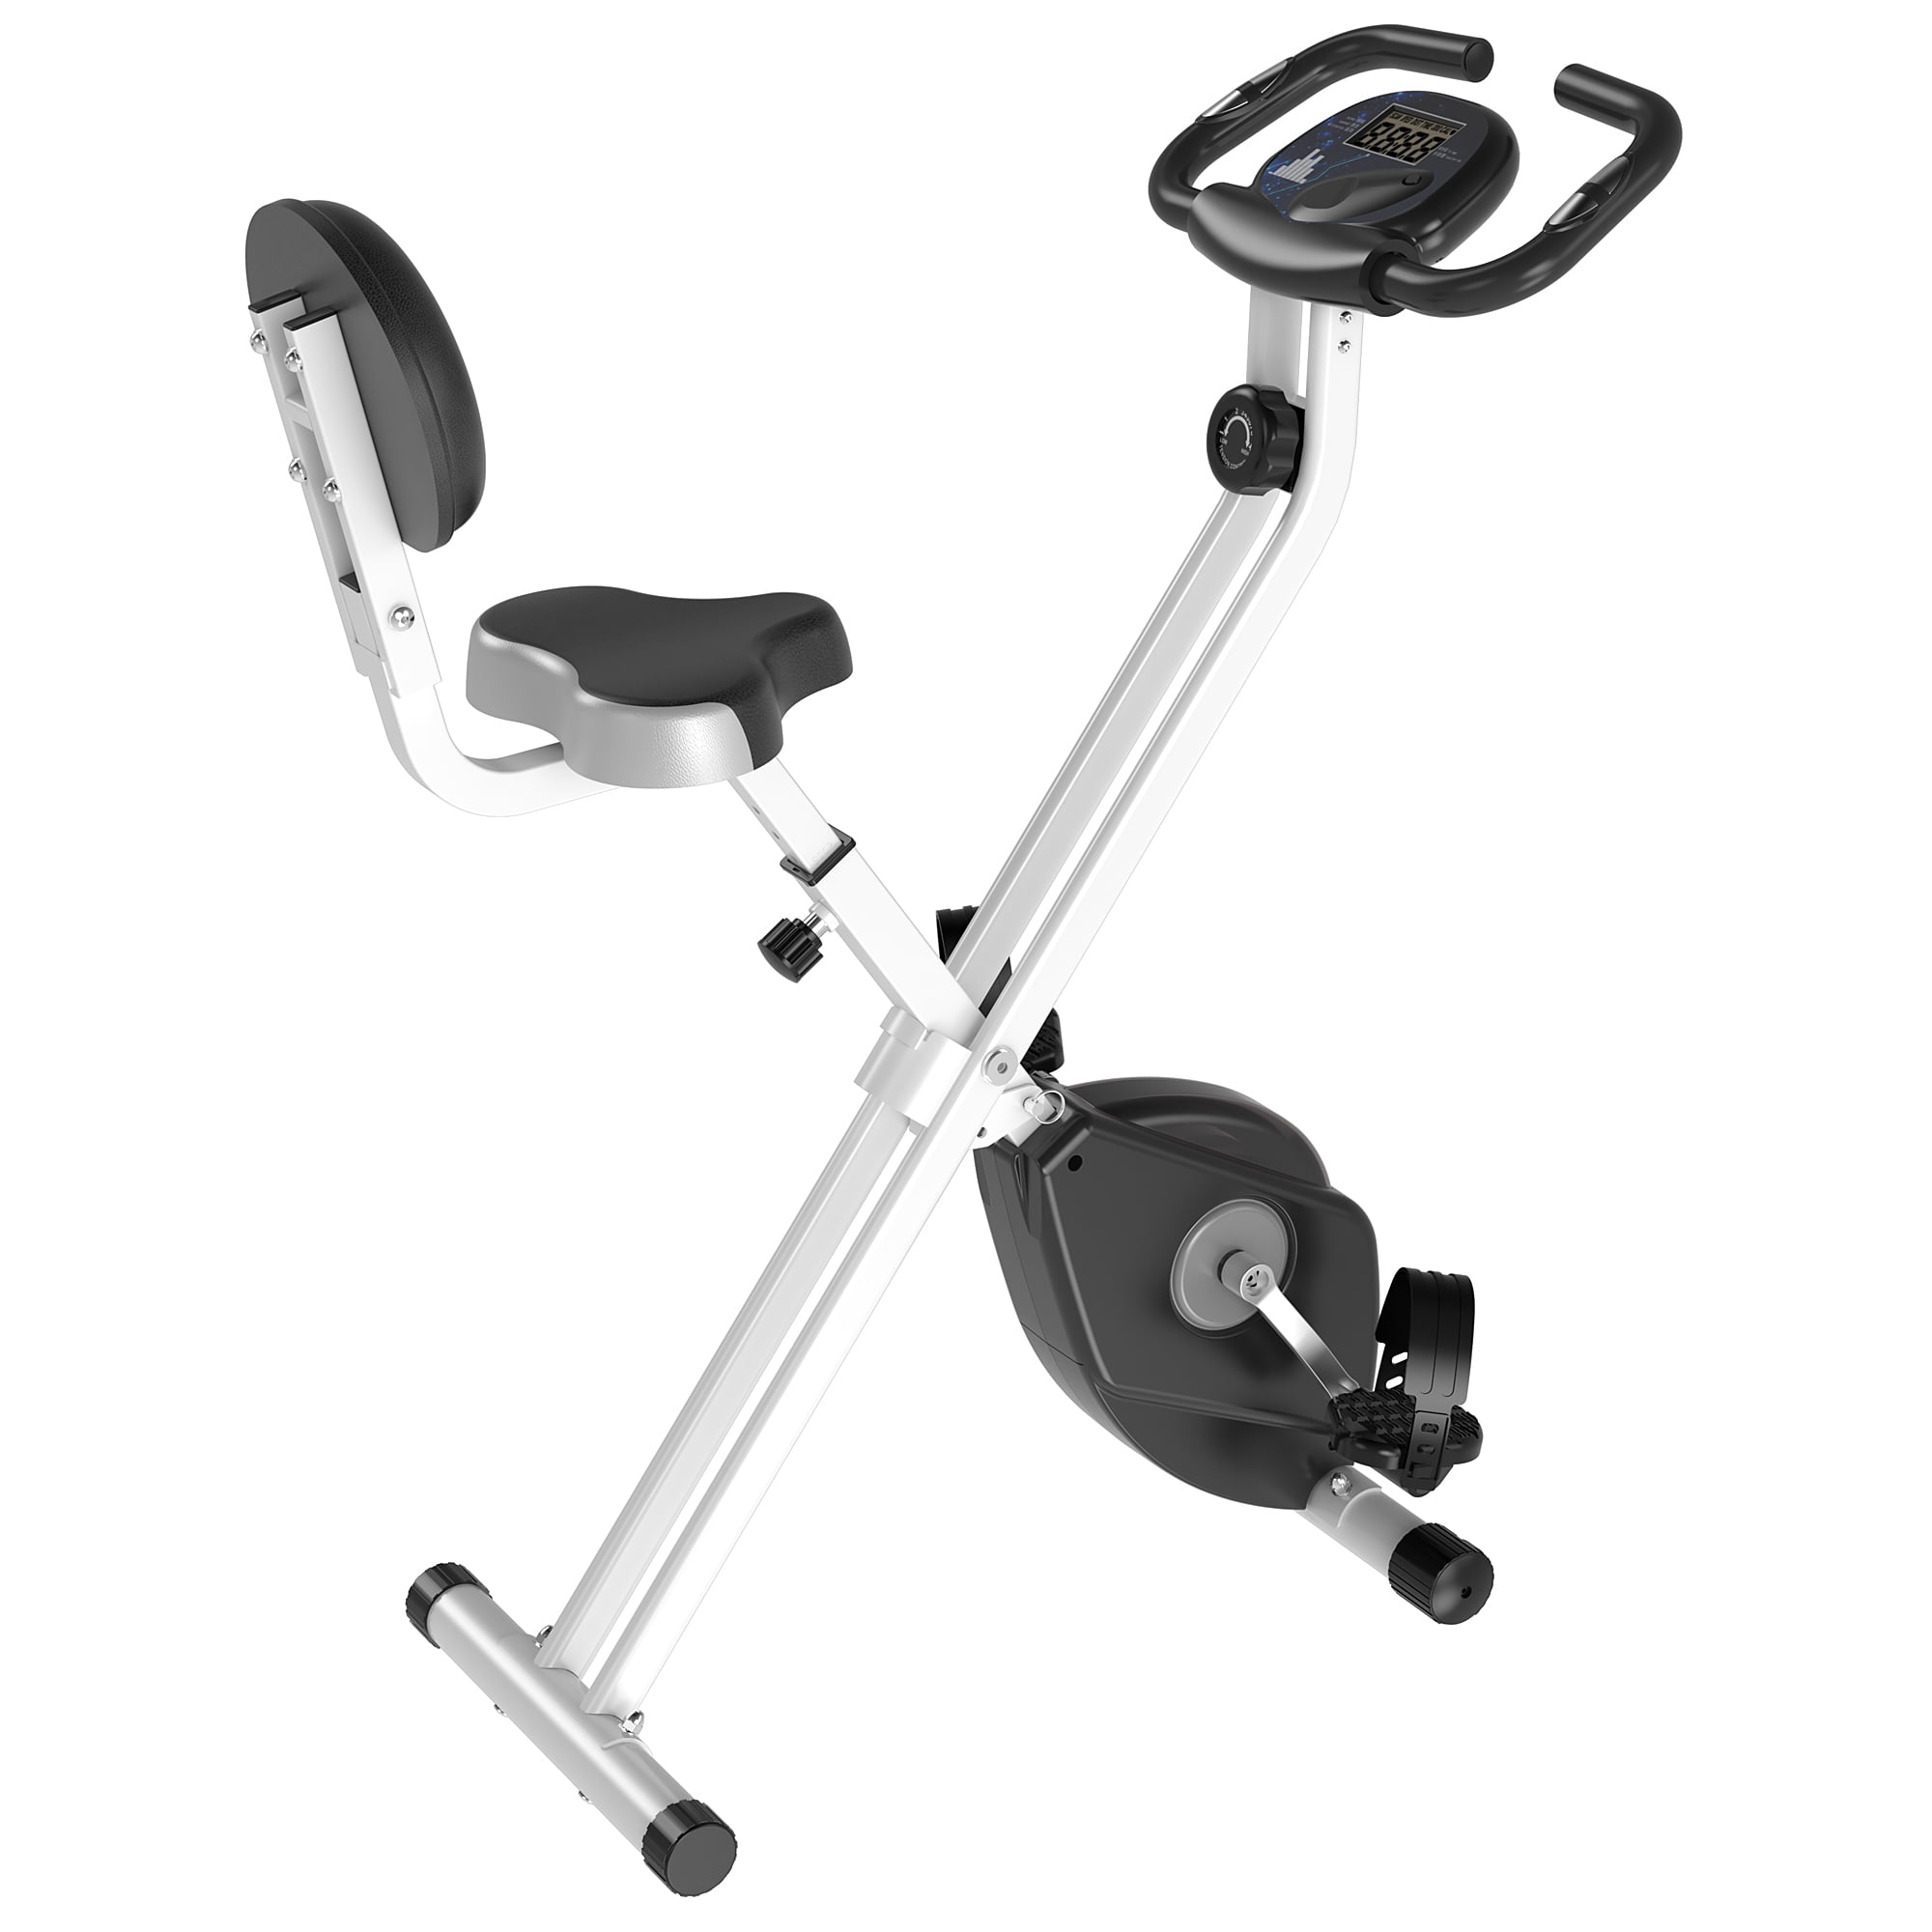 Soozier Folding Upright Training Stationary Indoor Bike With Levels Of Magnetic Resistance For